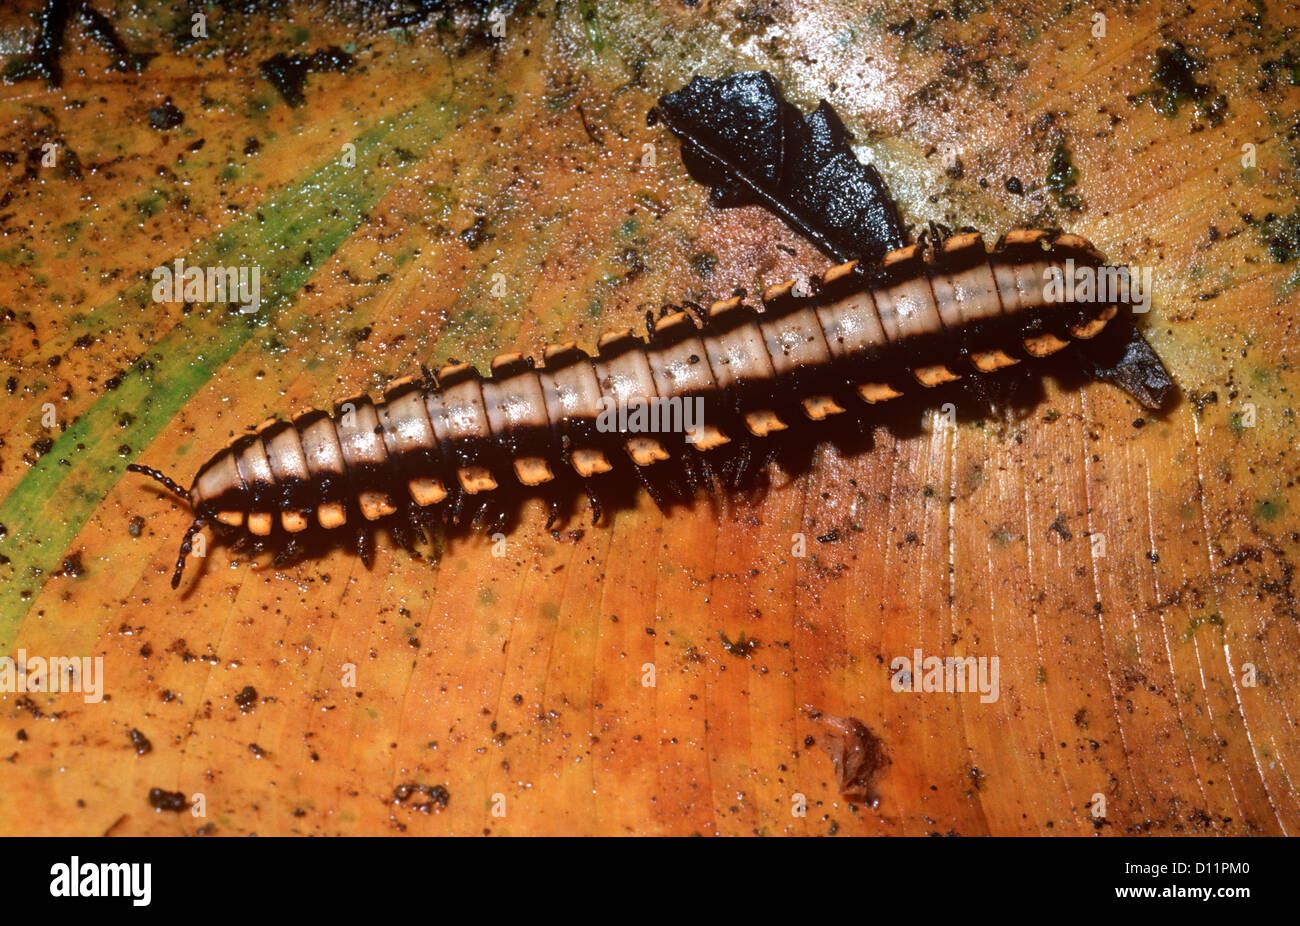 Giant flat-backed millipede (Nyssodesmus python) in rainforest Costa Rica Stock Photo